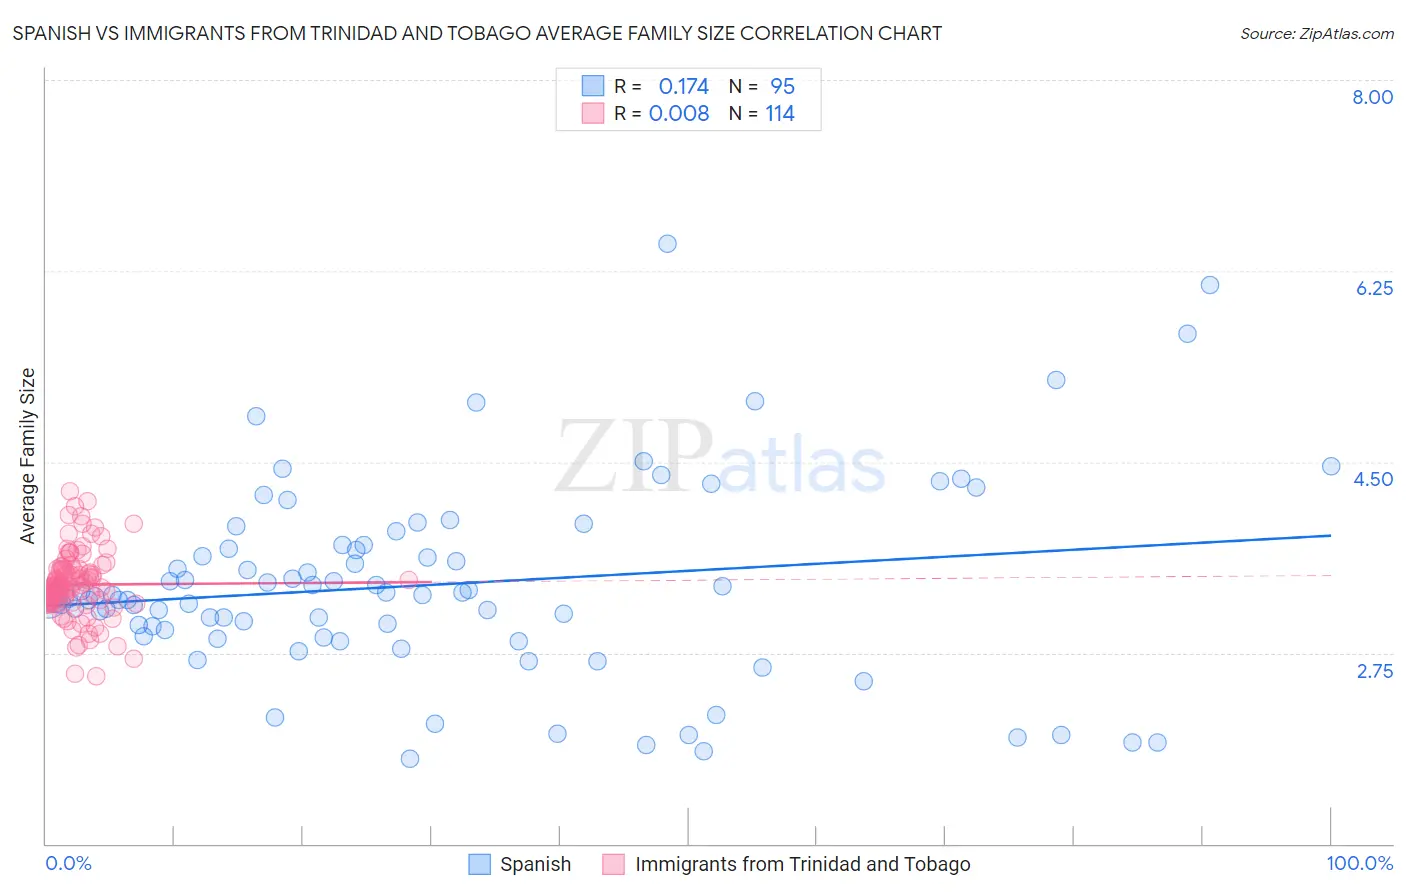 Spanish vs Immigrants from Trinidad and Tobago Average Family Size